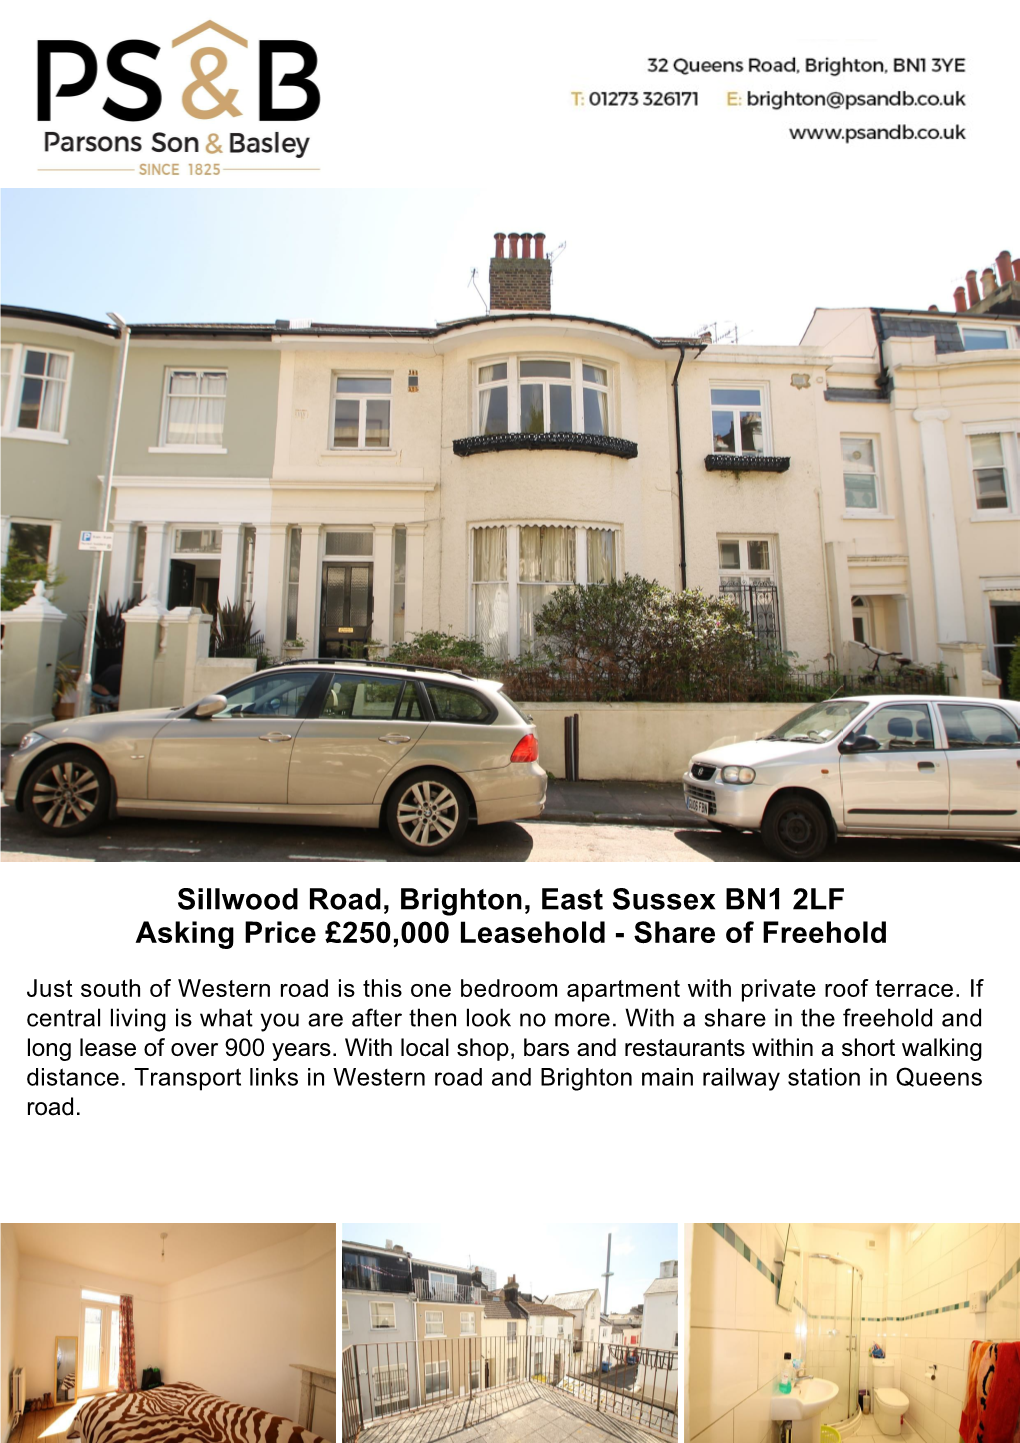 Sillwood Road, Brighton, East Sussex BN1 2LF Asking Price £250,000 Leasehold - Share of Freehold